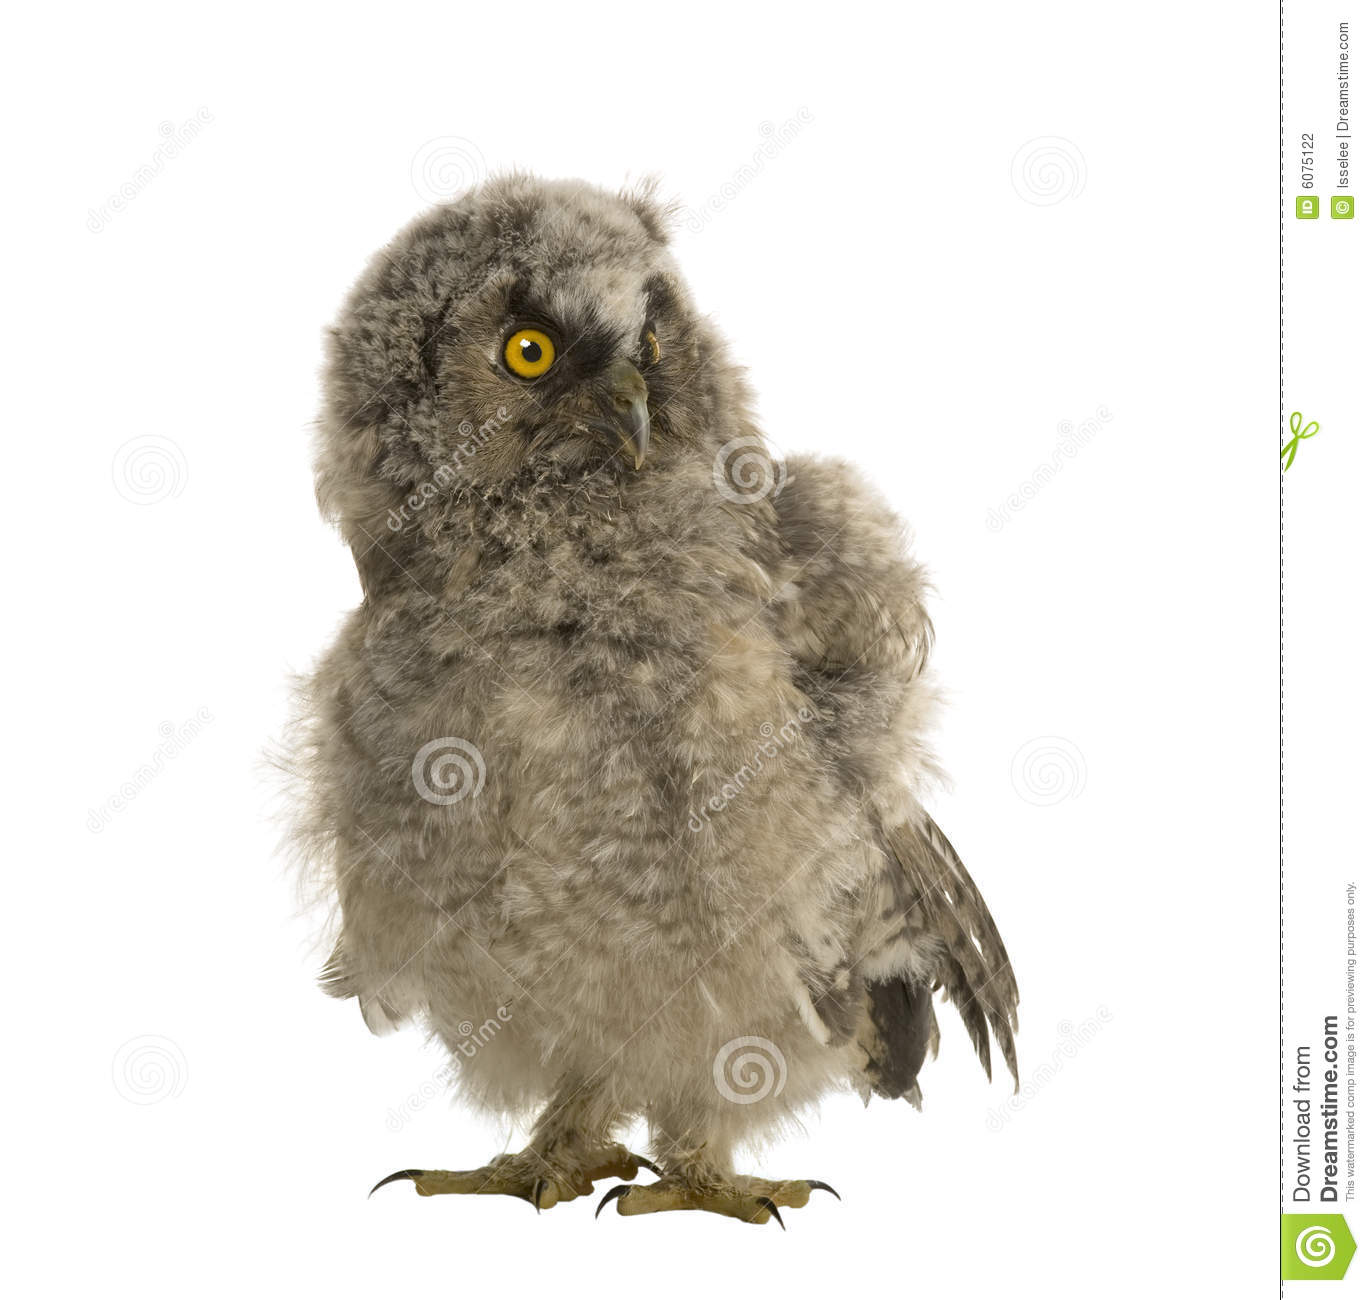 Long Eared Owl clipart #5, Download drawings